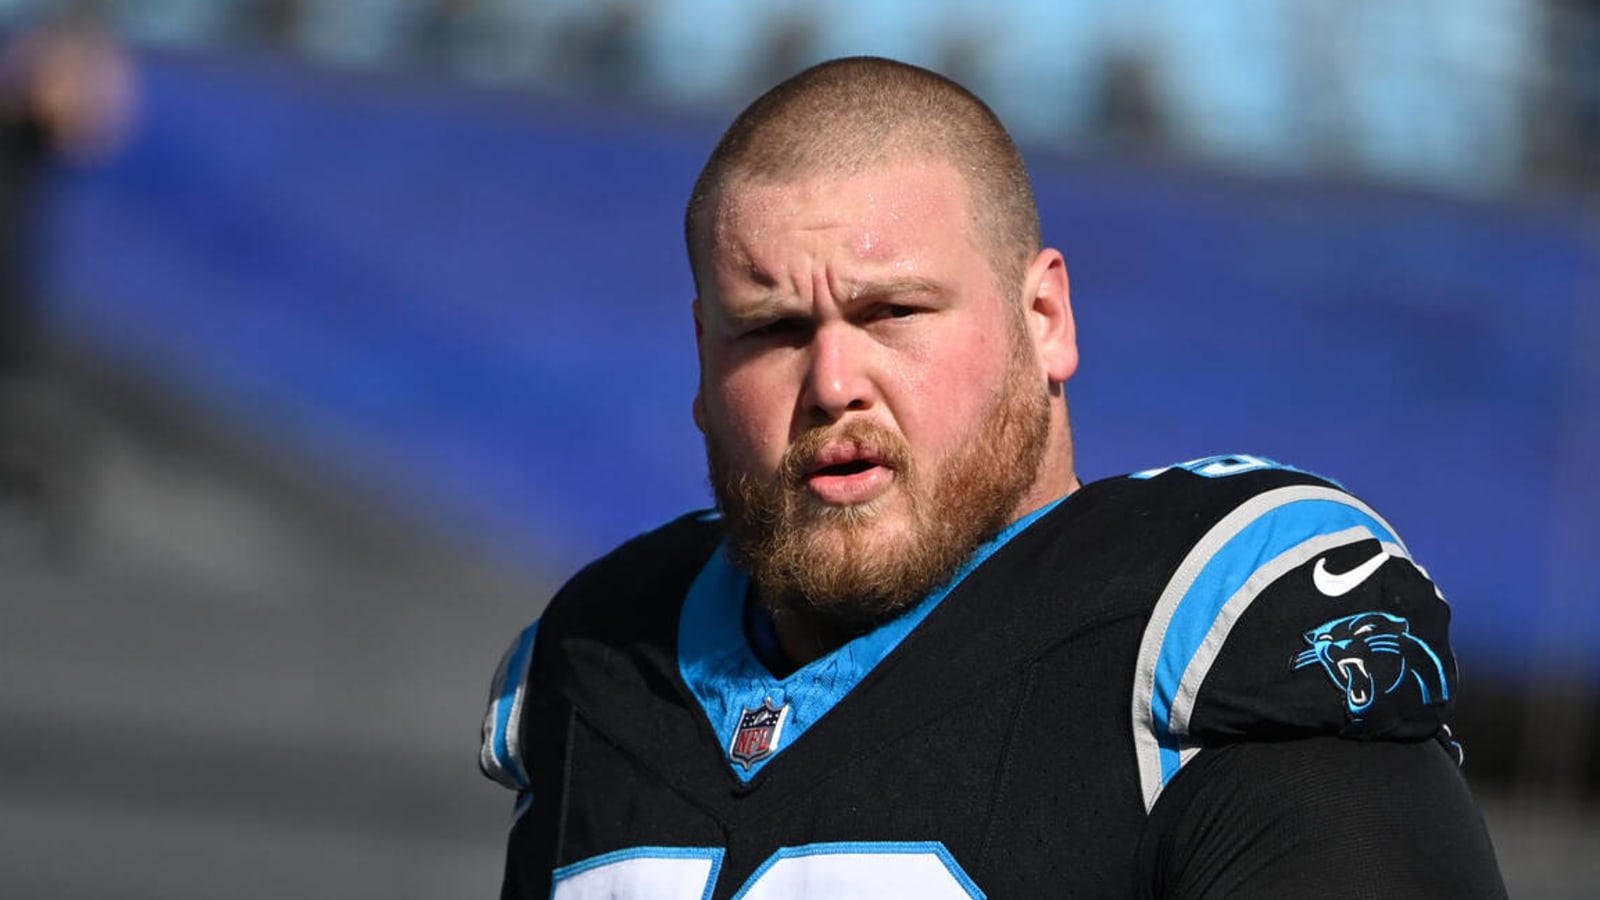 Chargers sign veteran offensive lineman to deal